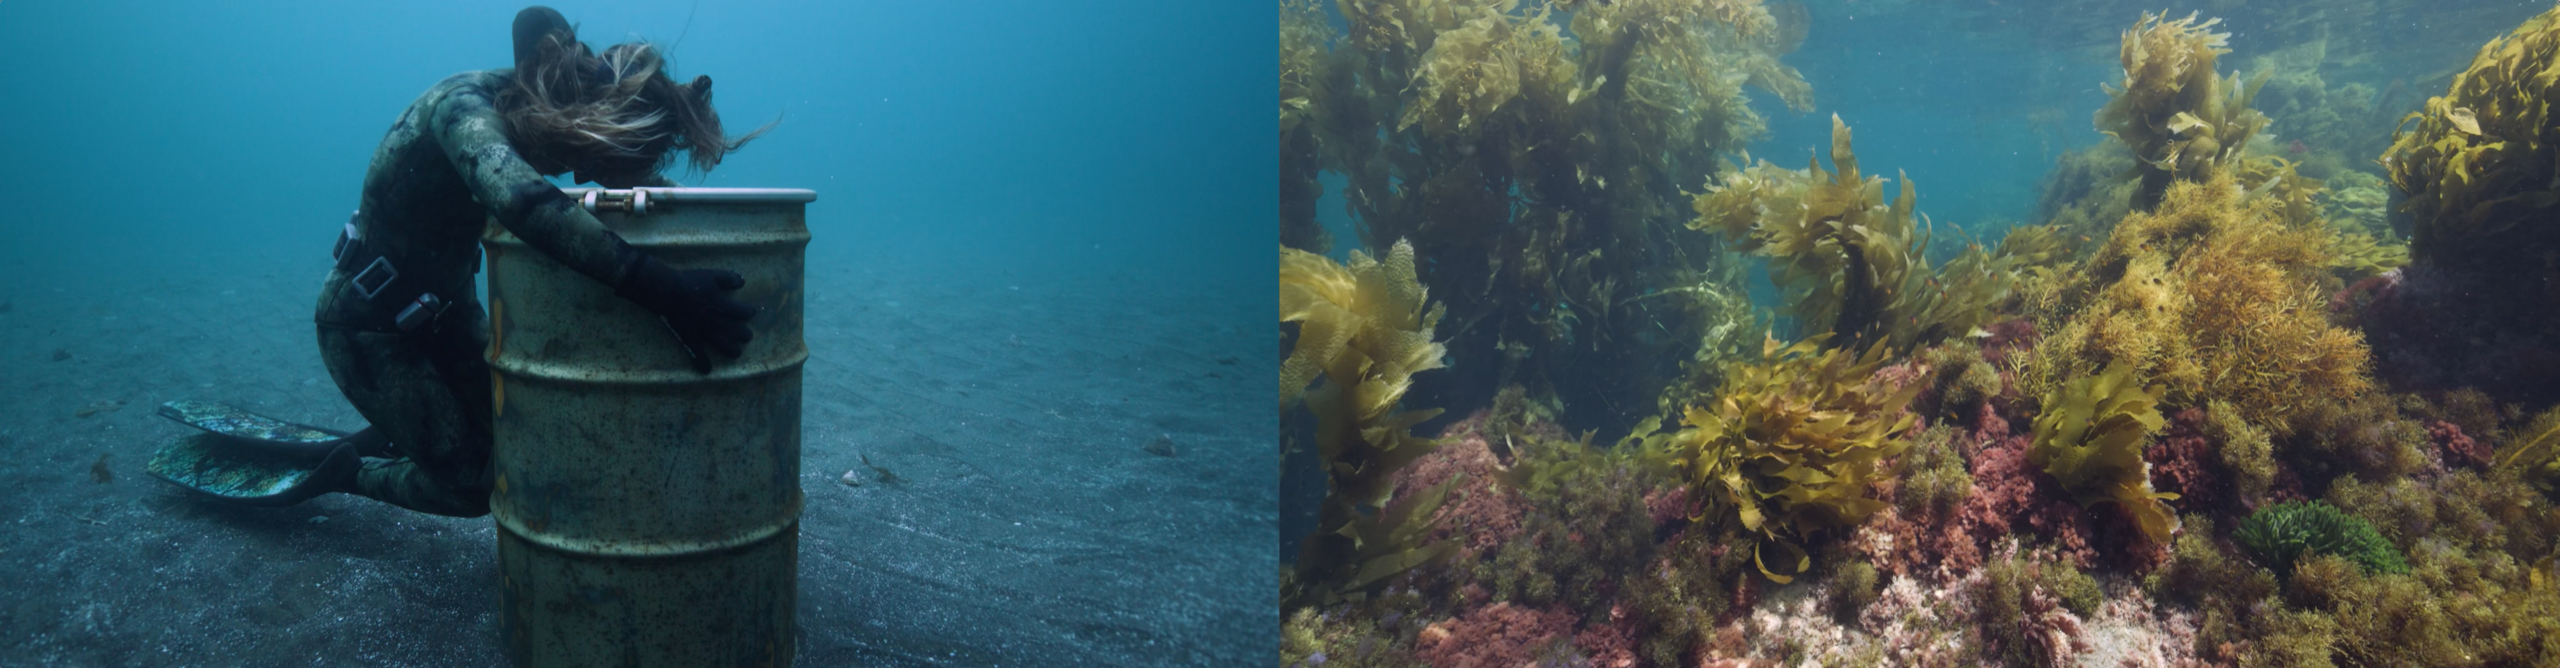 there are two frames, on the left a diver with a barrel, on the right coral